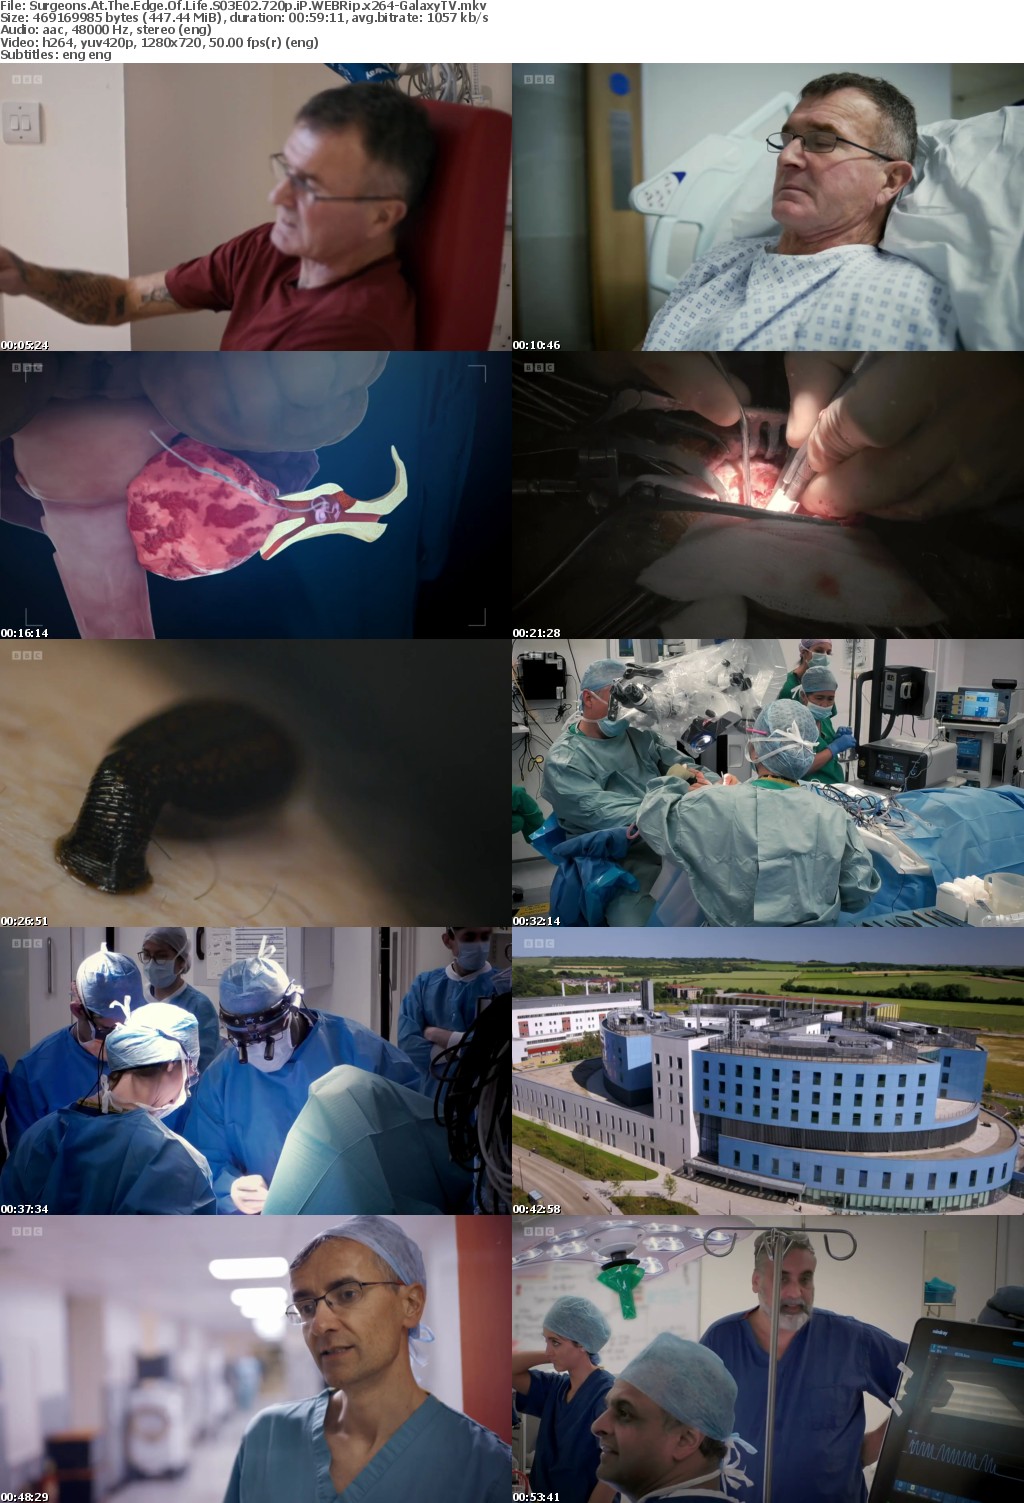 Surgeons At The Edge Of Life S03 COMPLETE 720p iP WEBRip x264-GalaxyTV